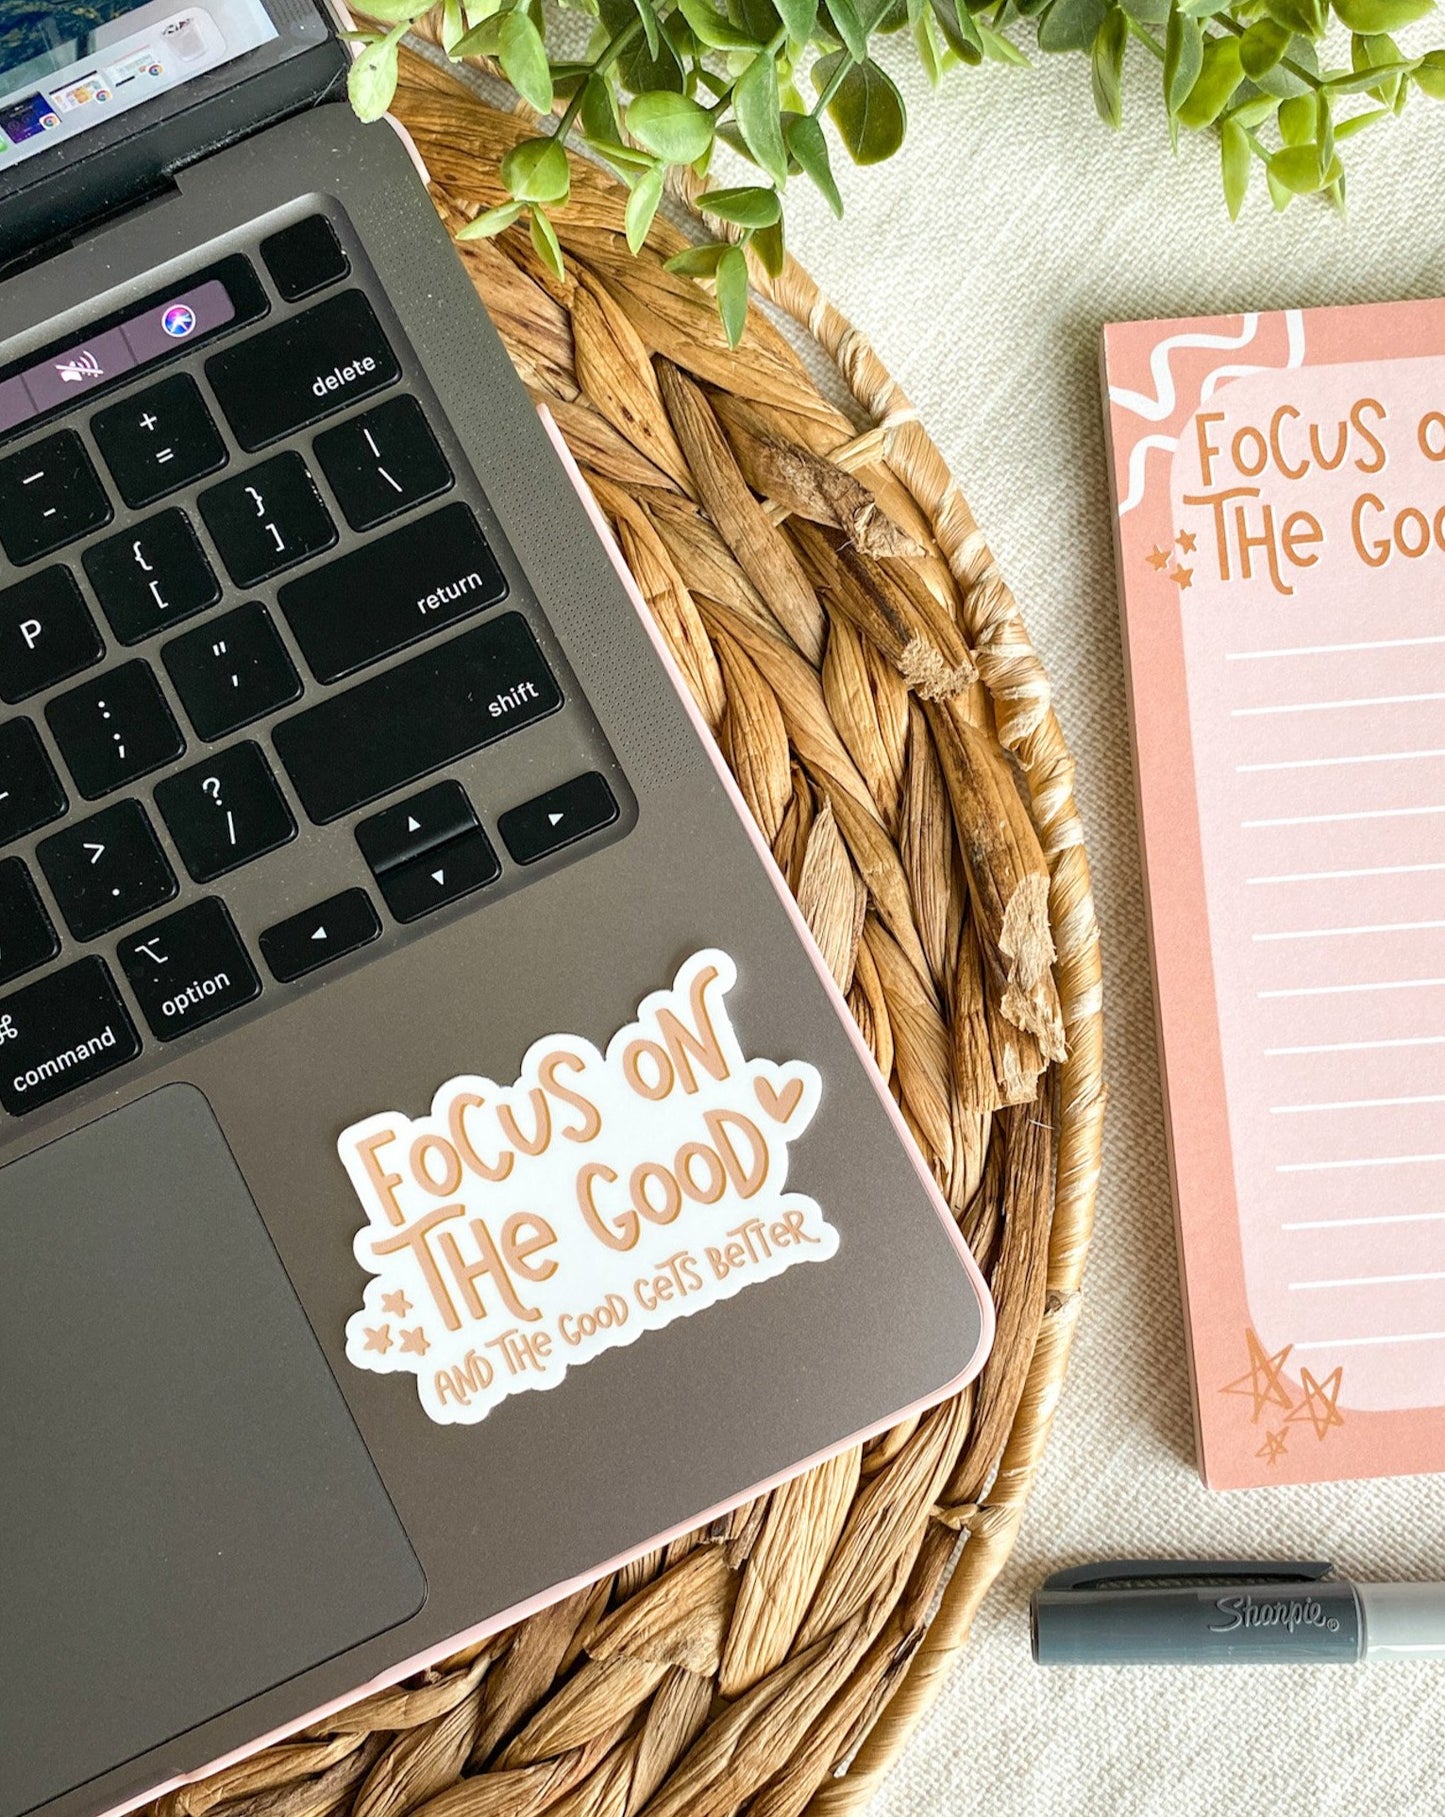 Focus on the Good and Good Gets Better Sticker